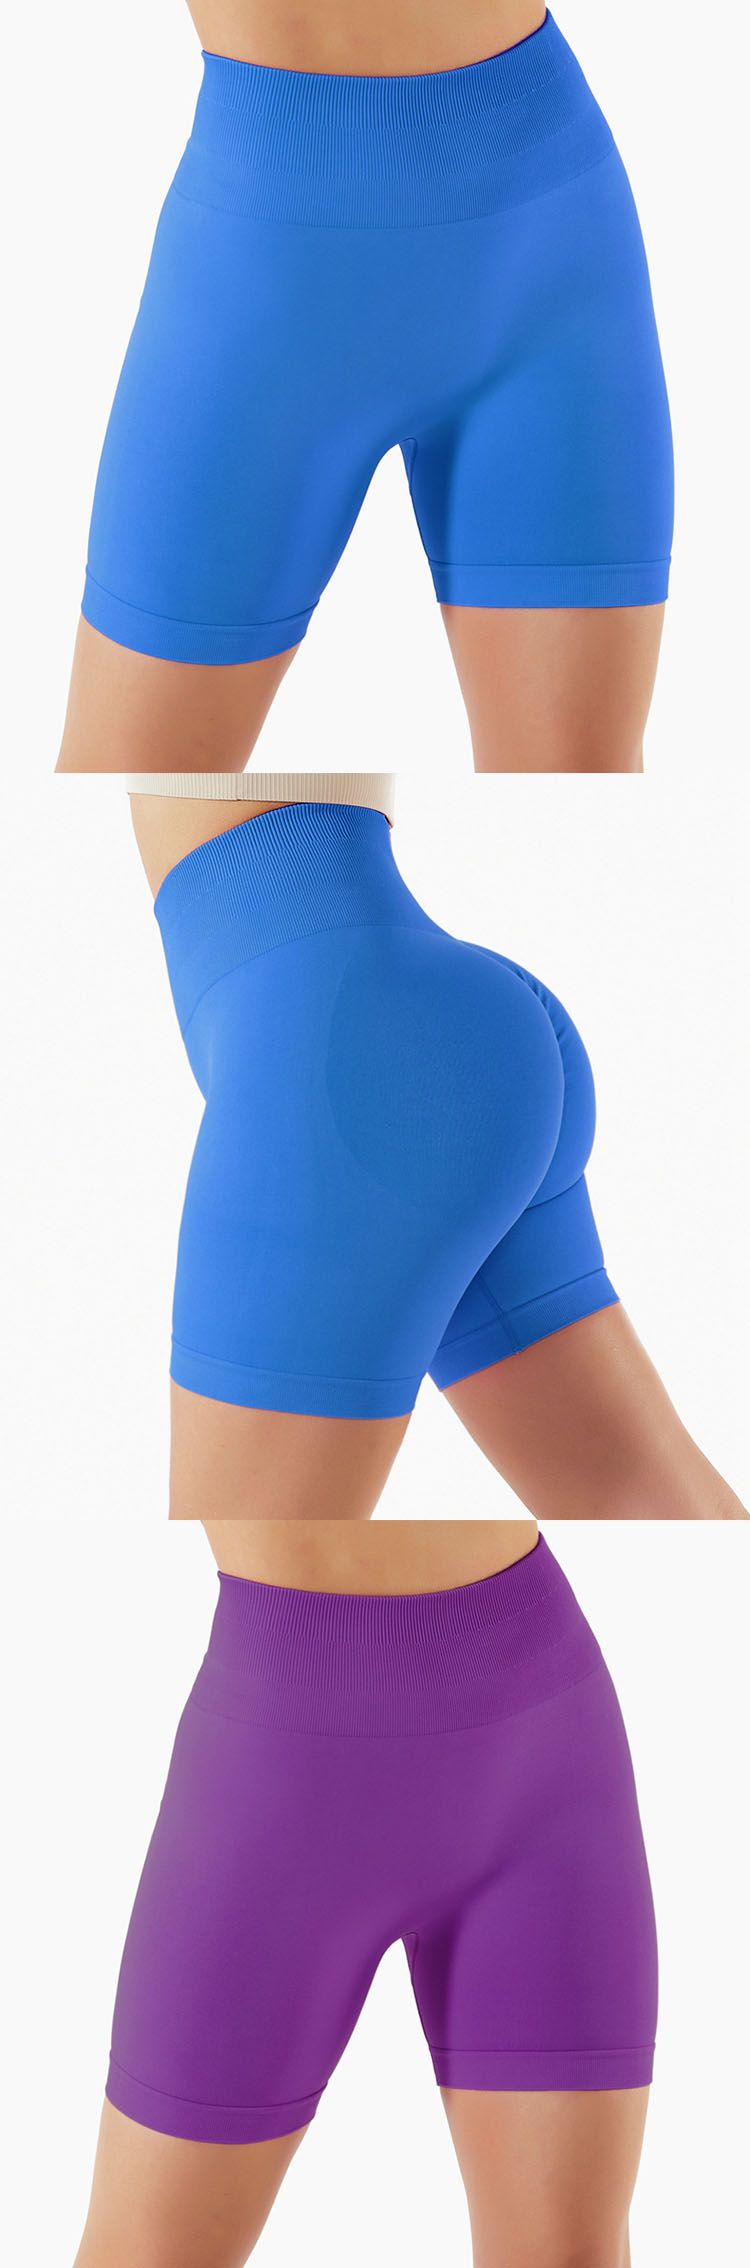 The arc-shaped hip line is different from the general hip line design, which lifts the buttocks